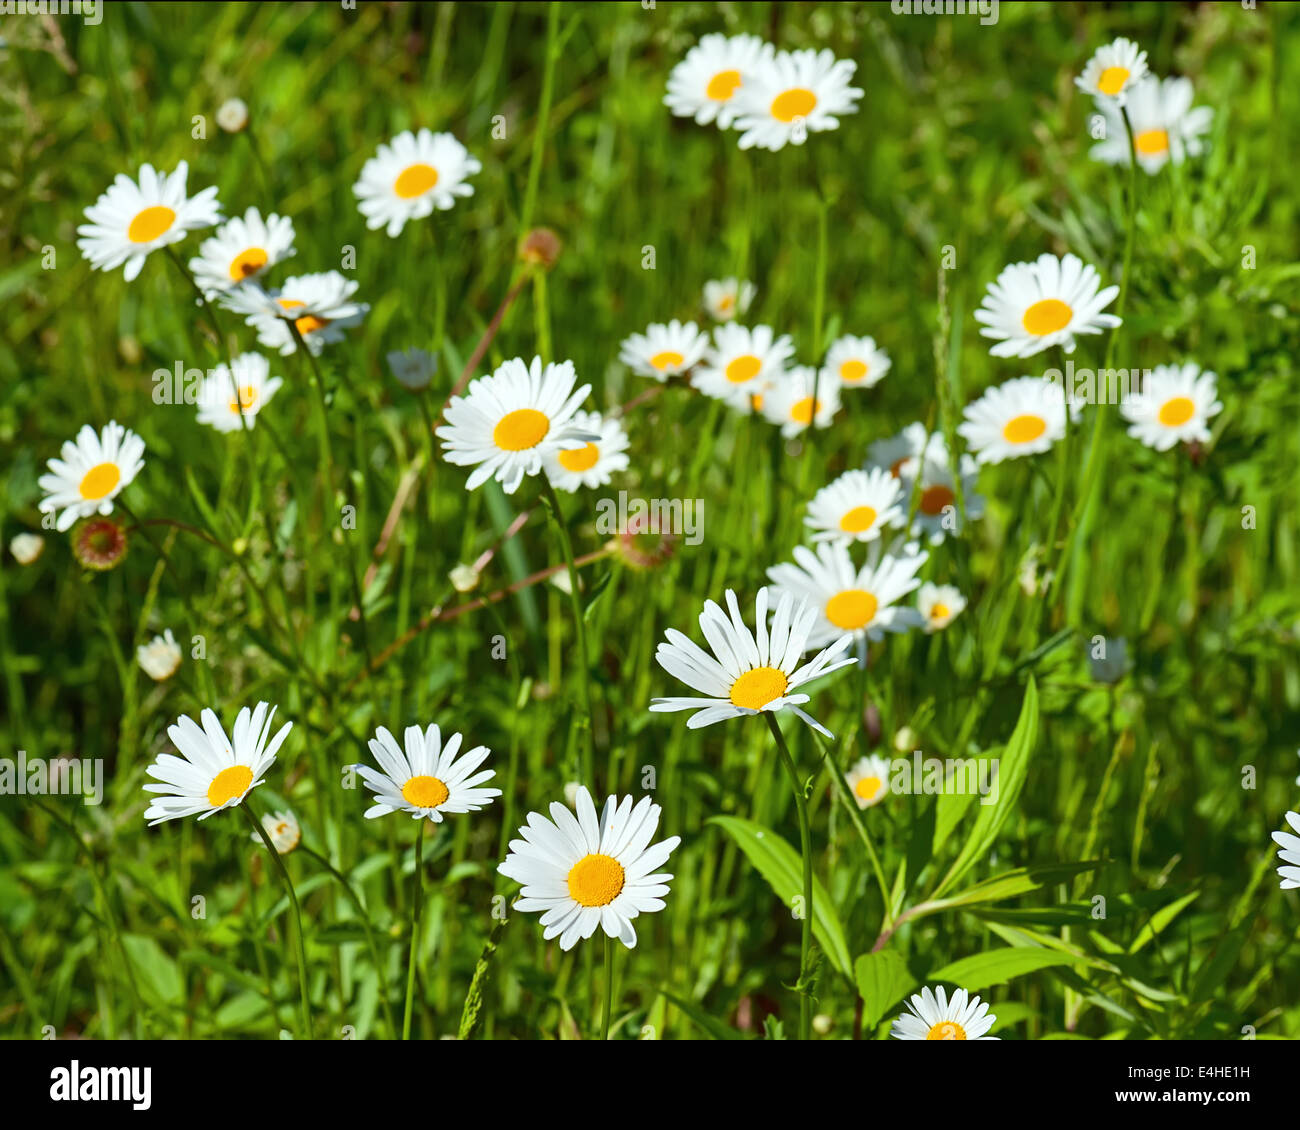 Green flowering meadow with white daisies. Natural background. Stock Photo